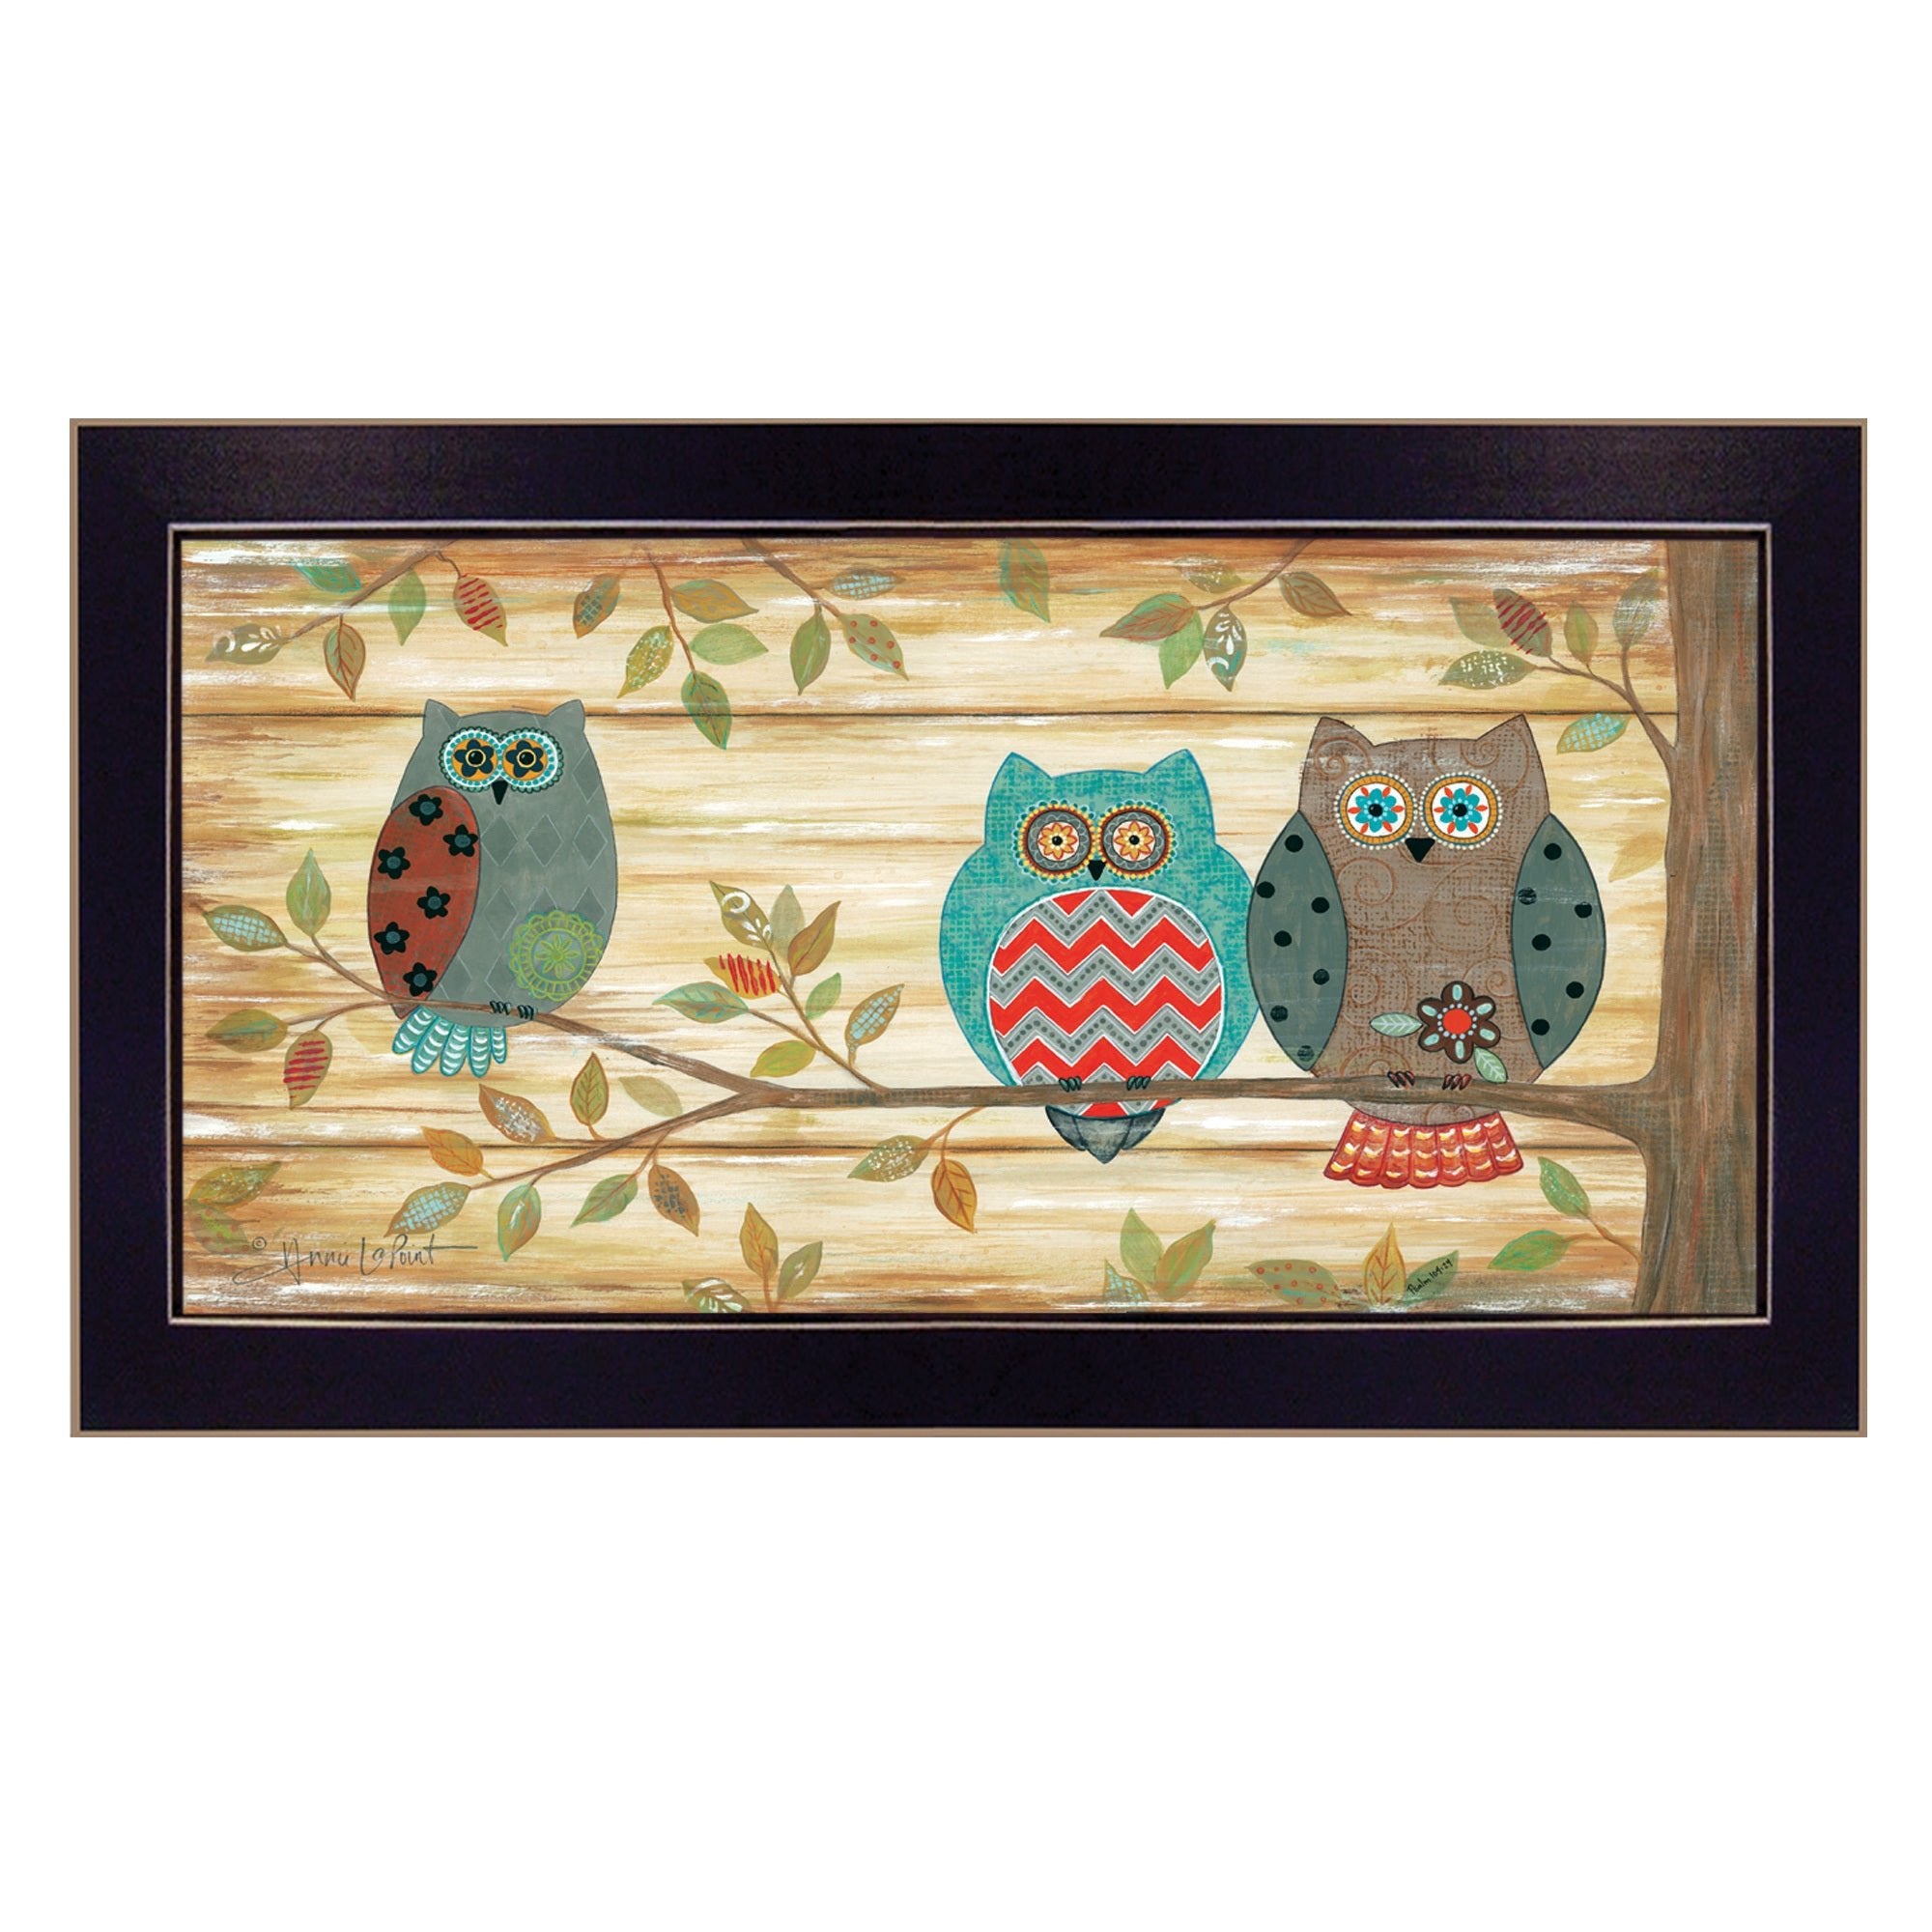 "Three Wise Owls" By Annie LaPoint, Printed Wall Art, Ready To Hang Framed Poster, Black Frame